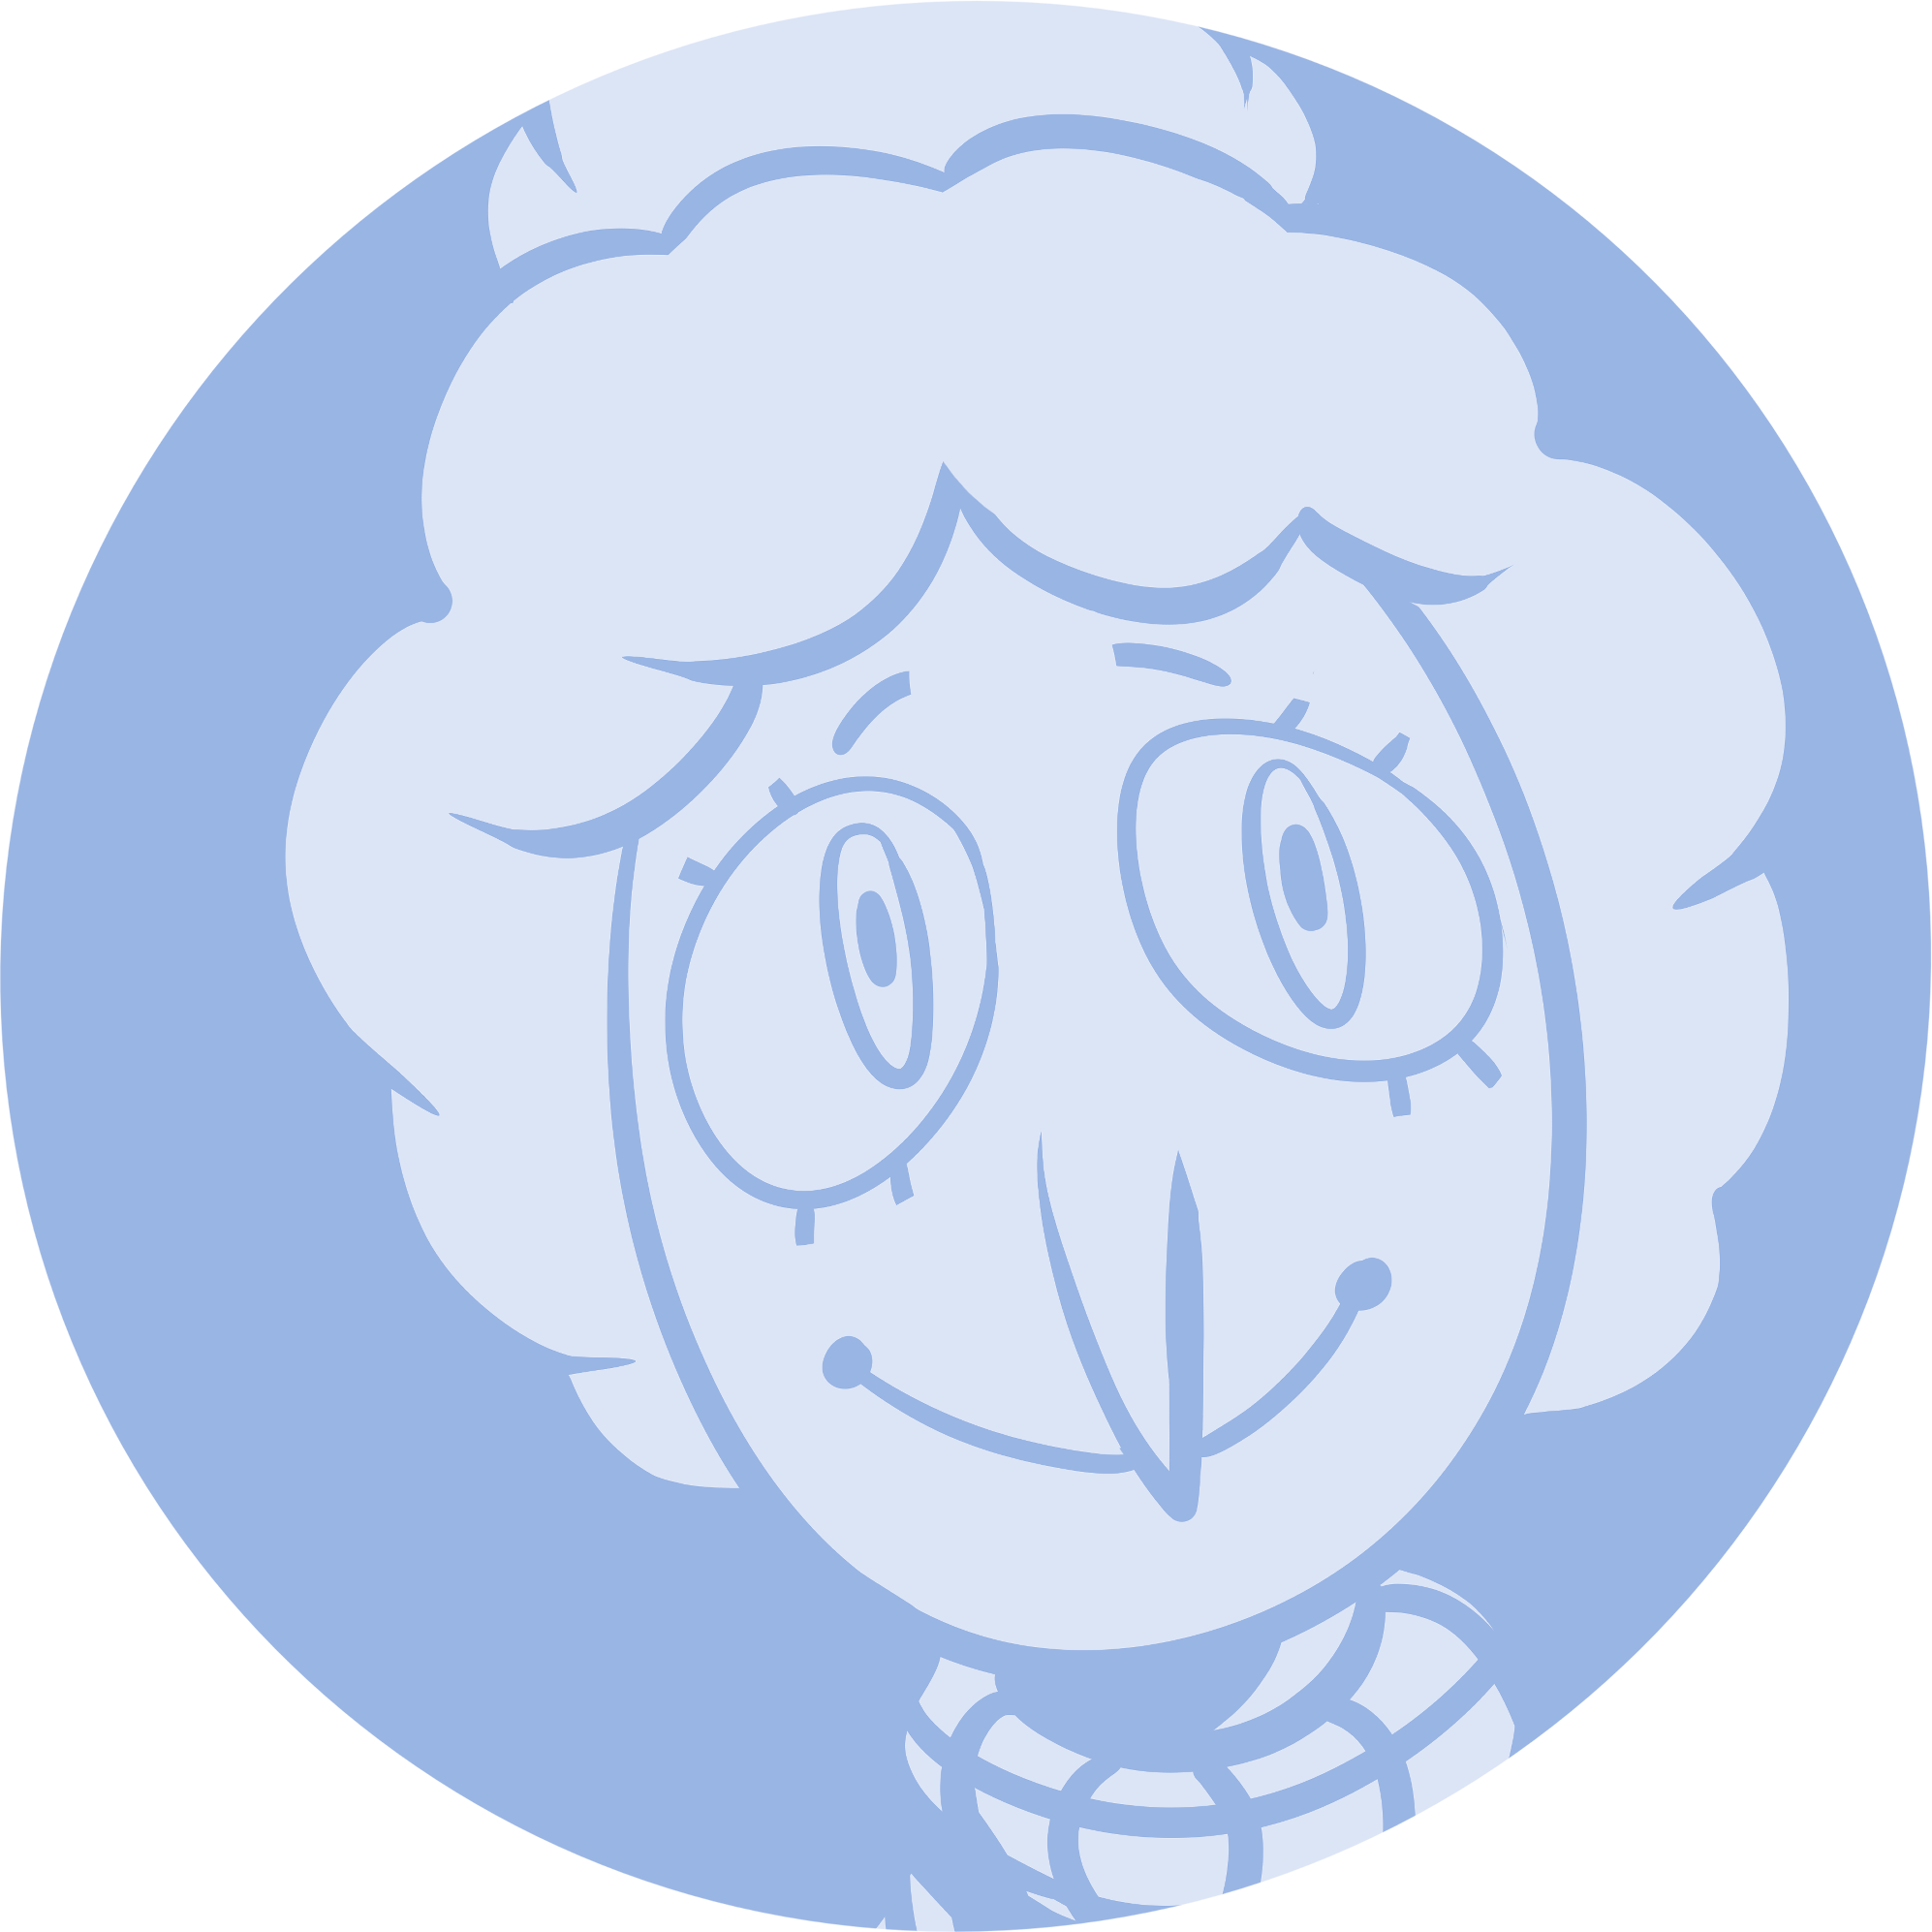 Image of Rory's mother. She looks like Mr. Blue, but has a curly bun on top. She has a sharp downturnt nose that crosses over her mouth, and larger oval blue eyes. Her turtleneck has purple gridded lines.